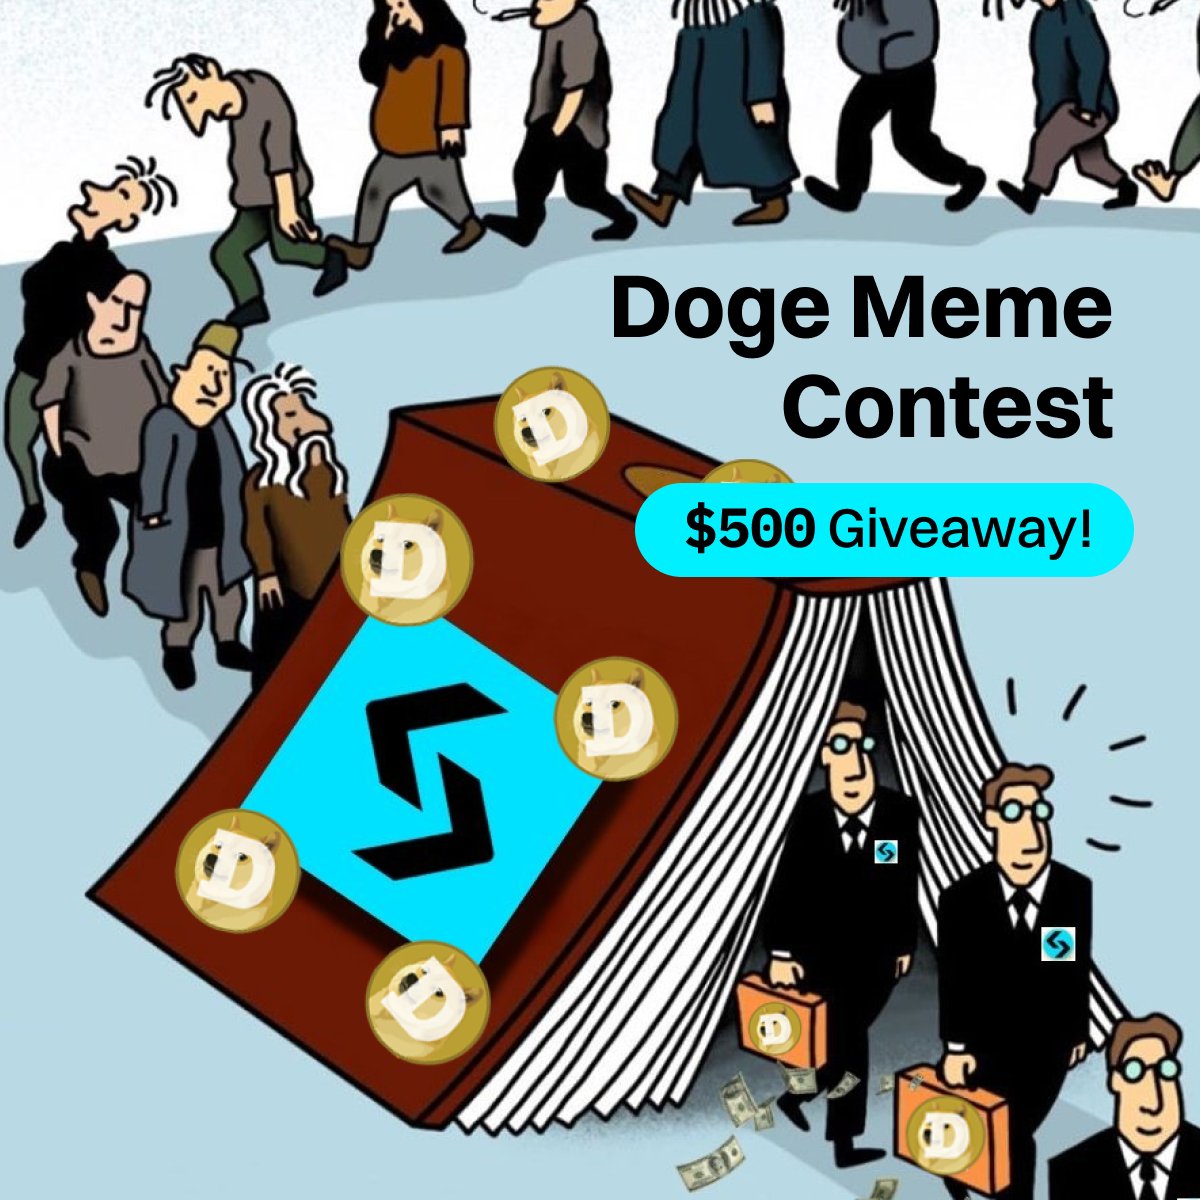 Join our #Dogeday meme contest and win $500 giveaway! 🐶💰 ✅ Create a meme with #Doge and #Bitget vibes ✅ Post it with #BitgetDogeday ✅ Follow @bitgetglobal & repost 🚀 10 winners will win $50 worth of $DOGE each!